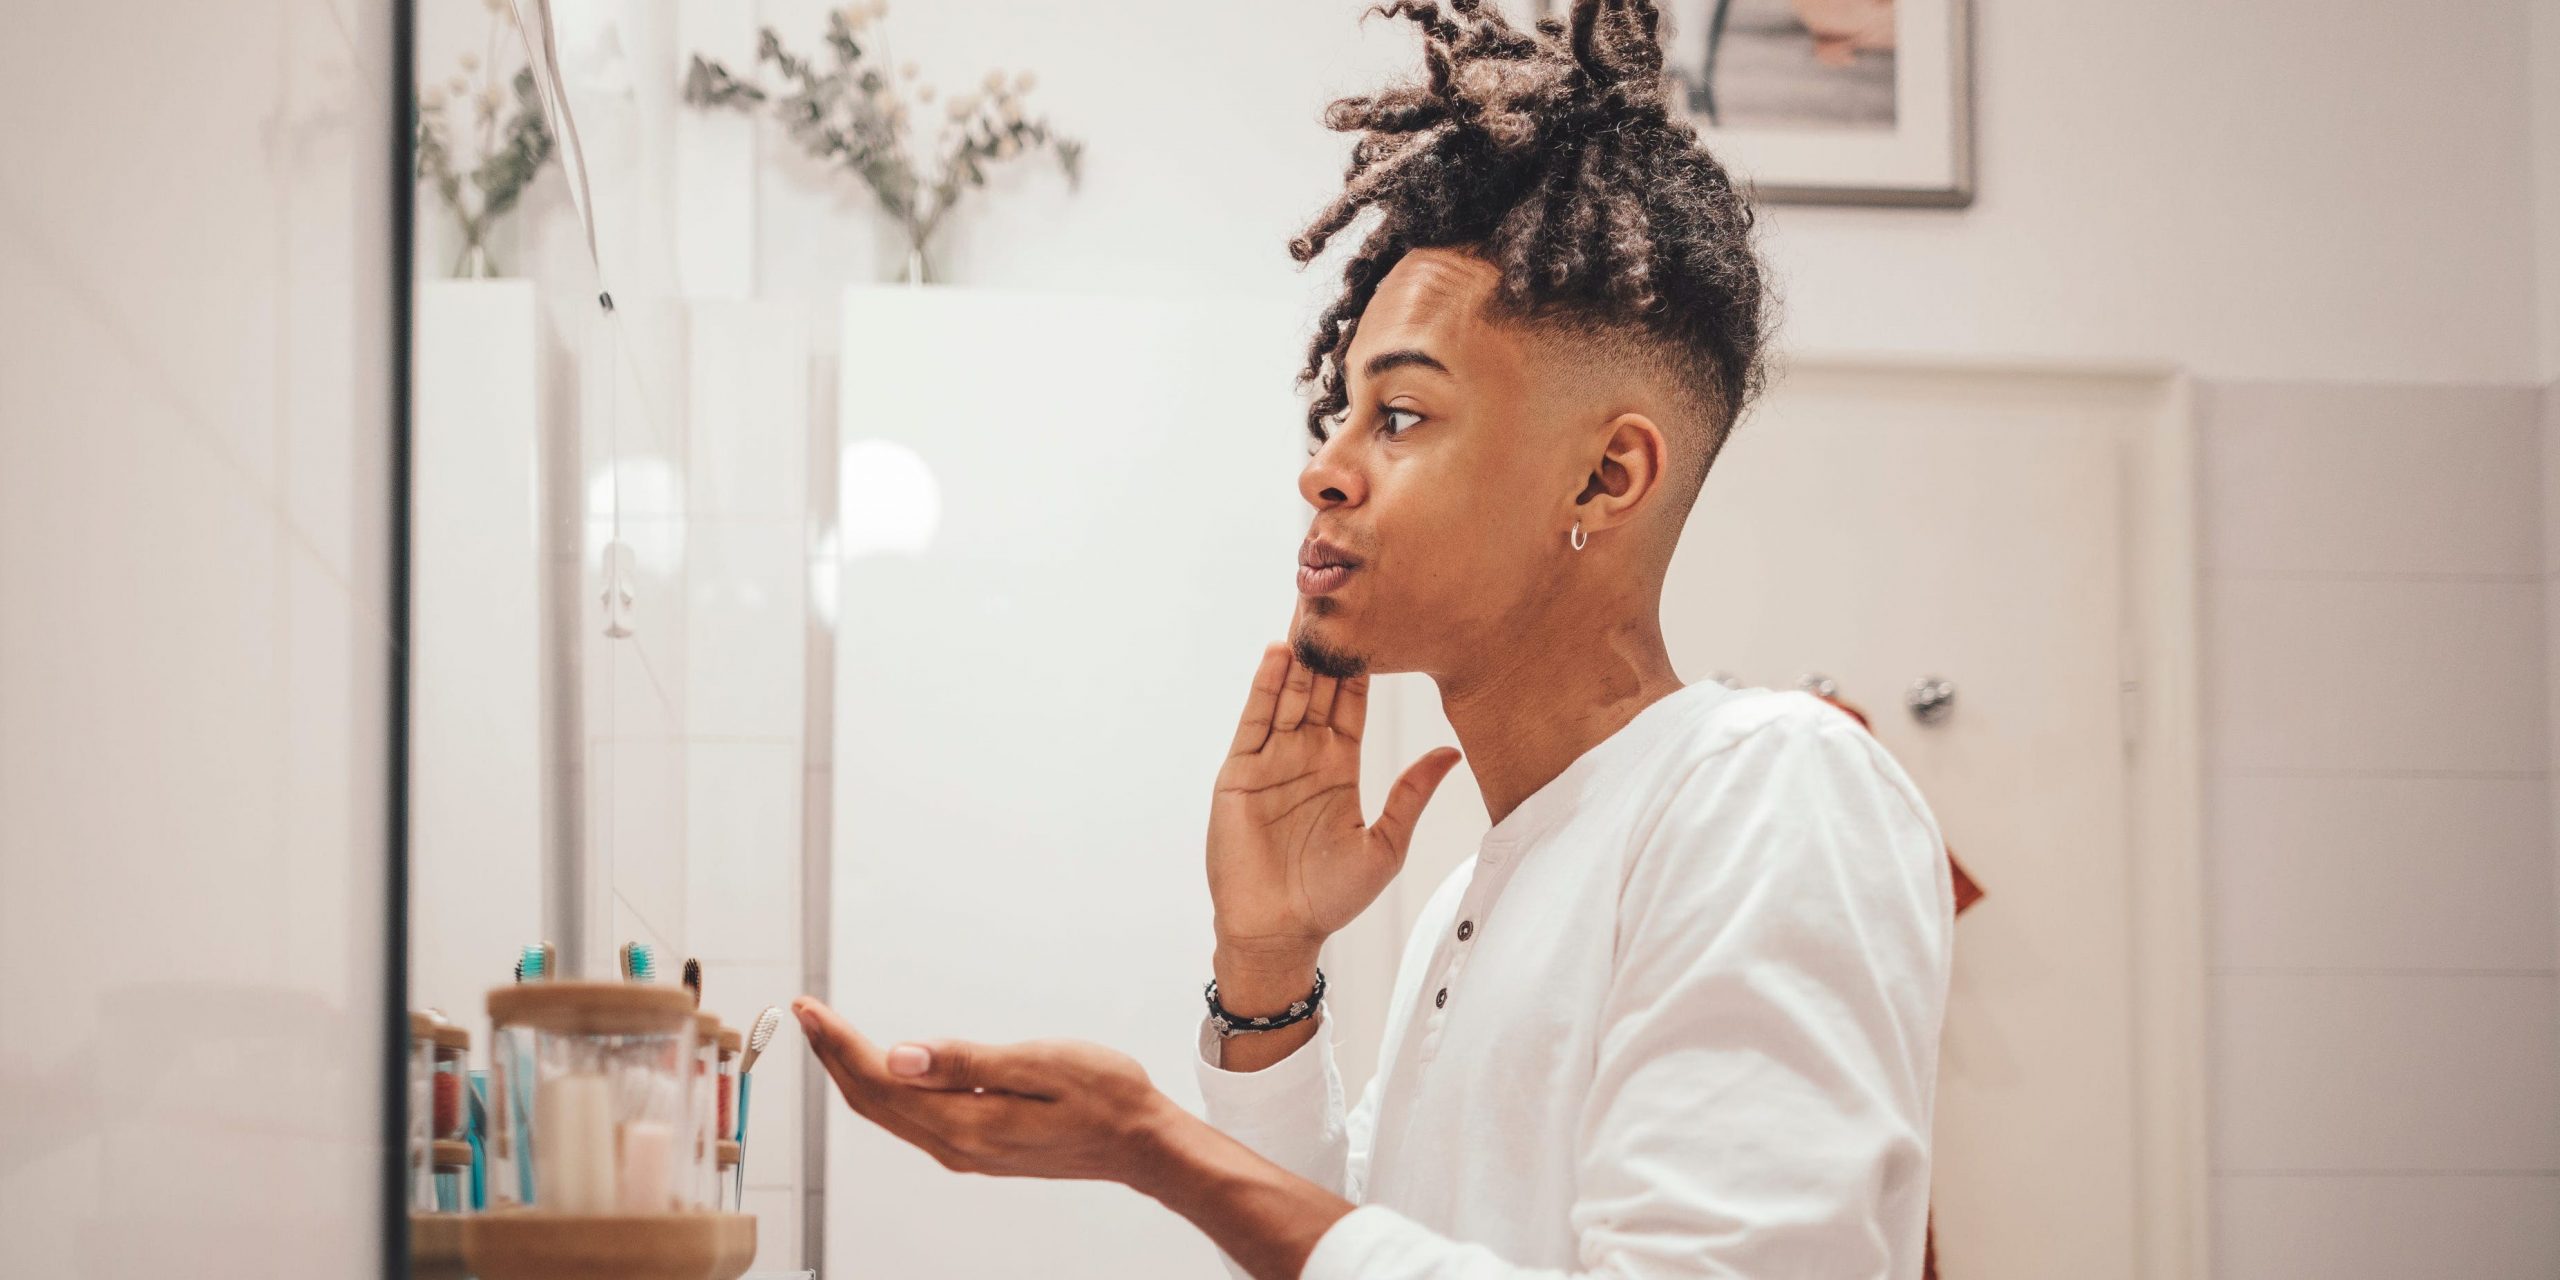 A young man in profile looks in the mirror as he applies skincare product to his face.